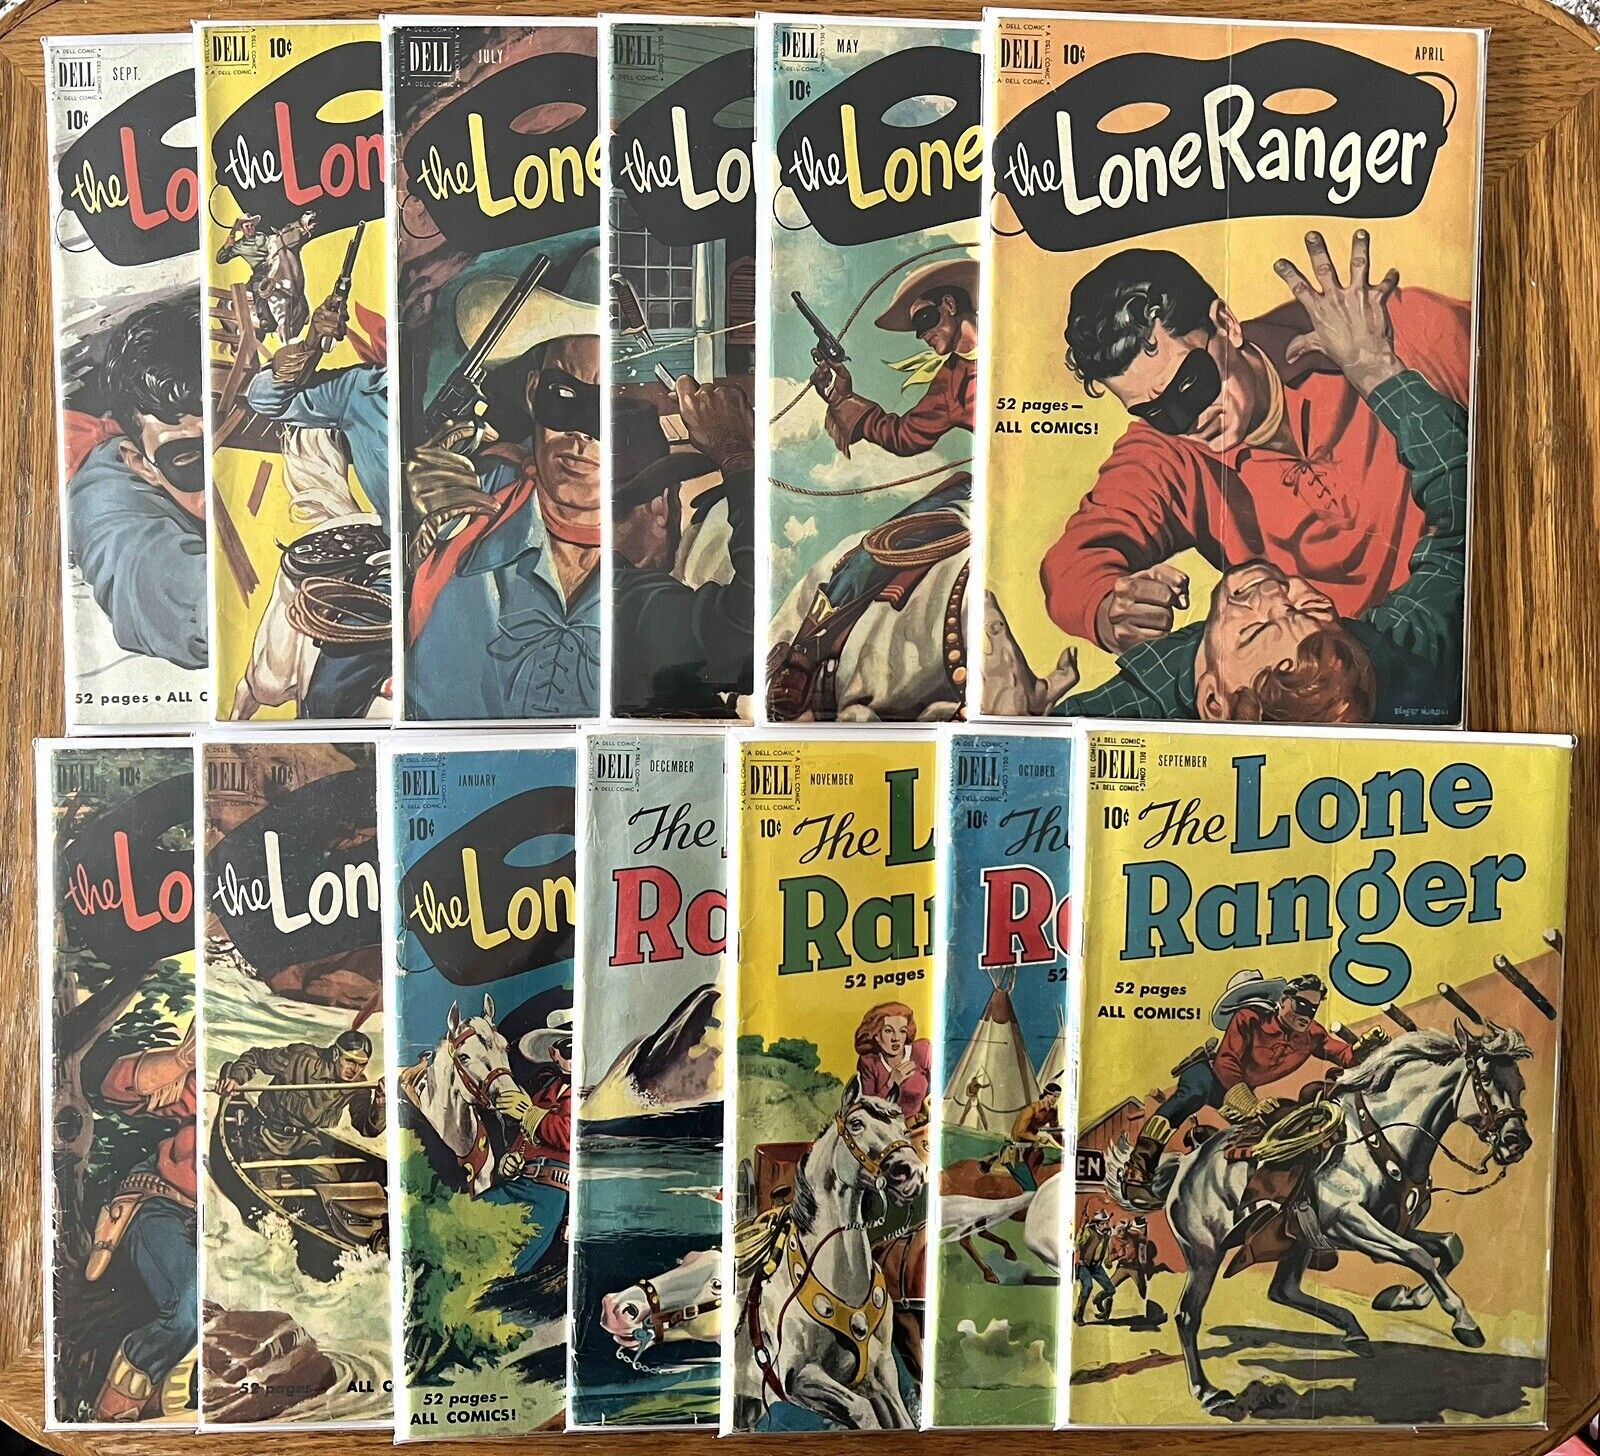 The Lone Ranger #27-39, 1950-1951 Dell Golden Age Comics, GD-VG